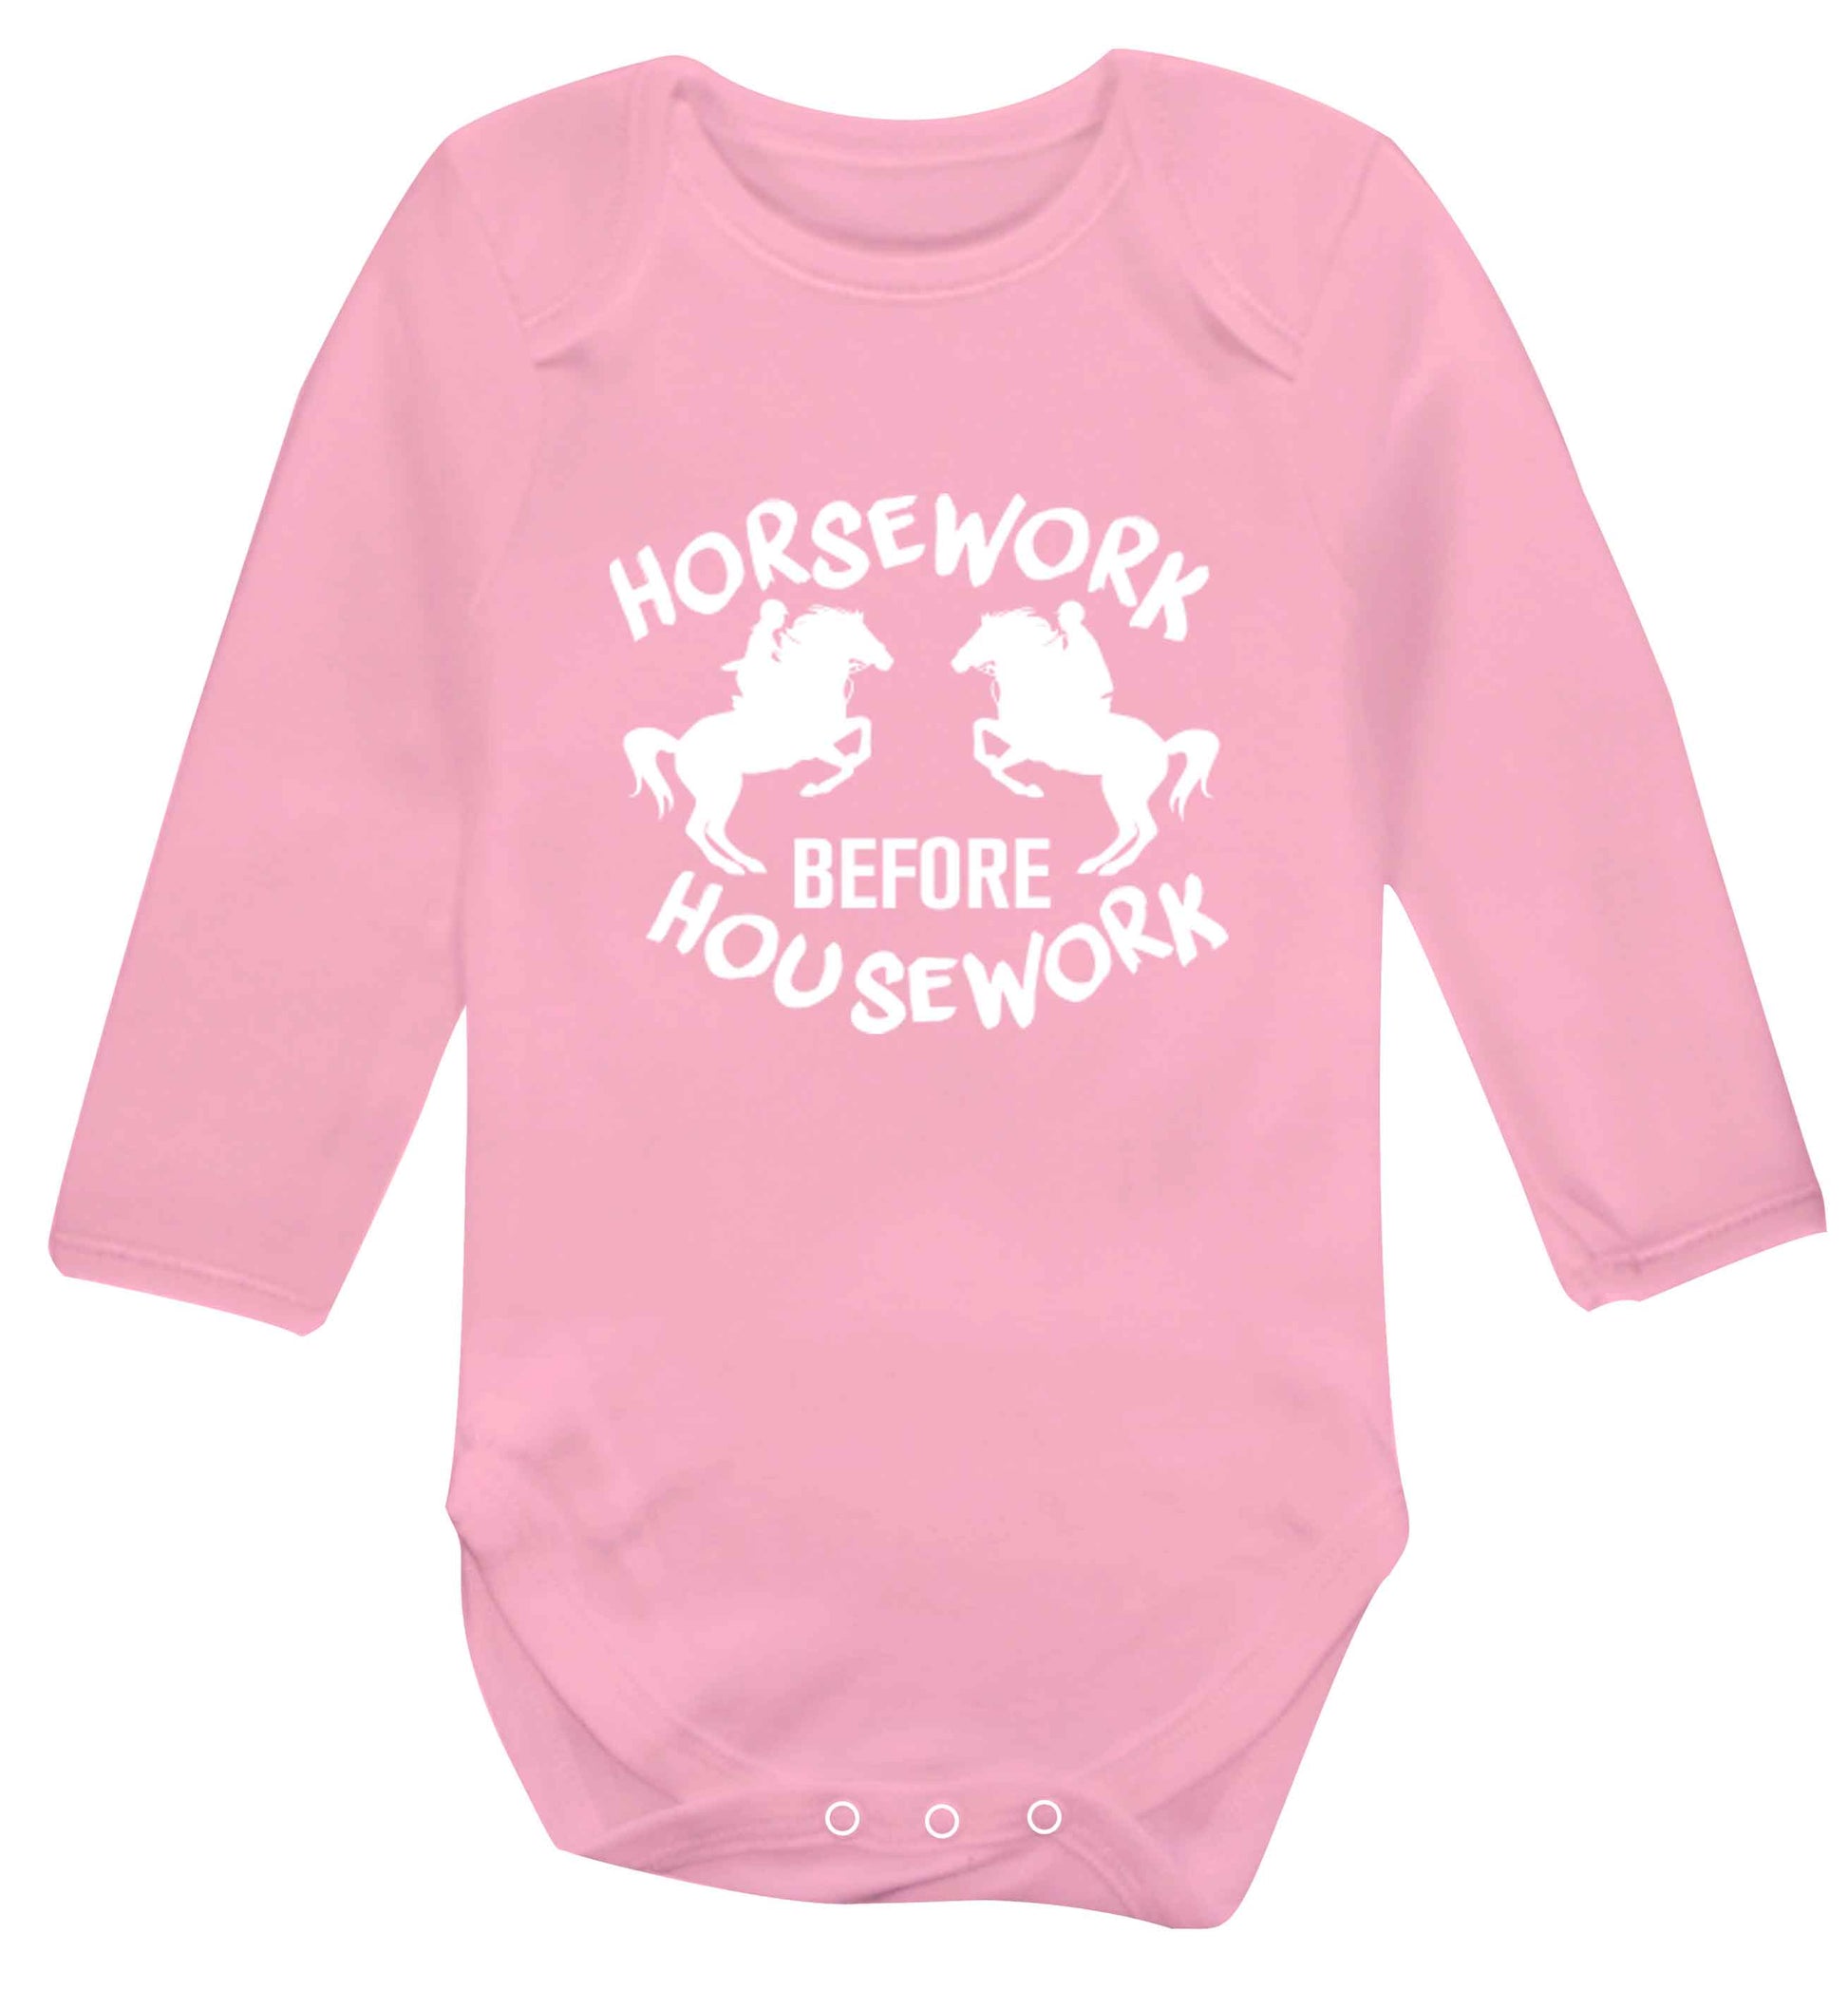 Horsework before housework baby vest long sleeved pale pink 6-12 months